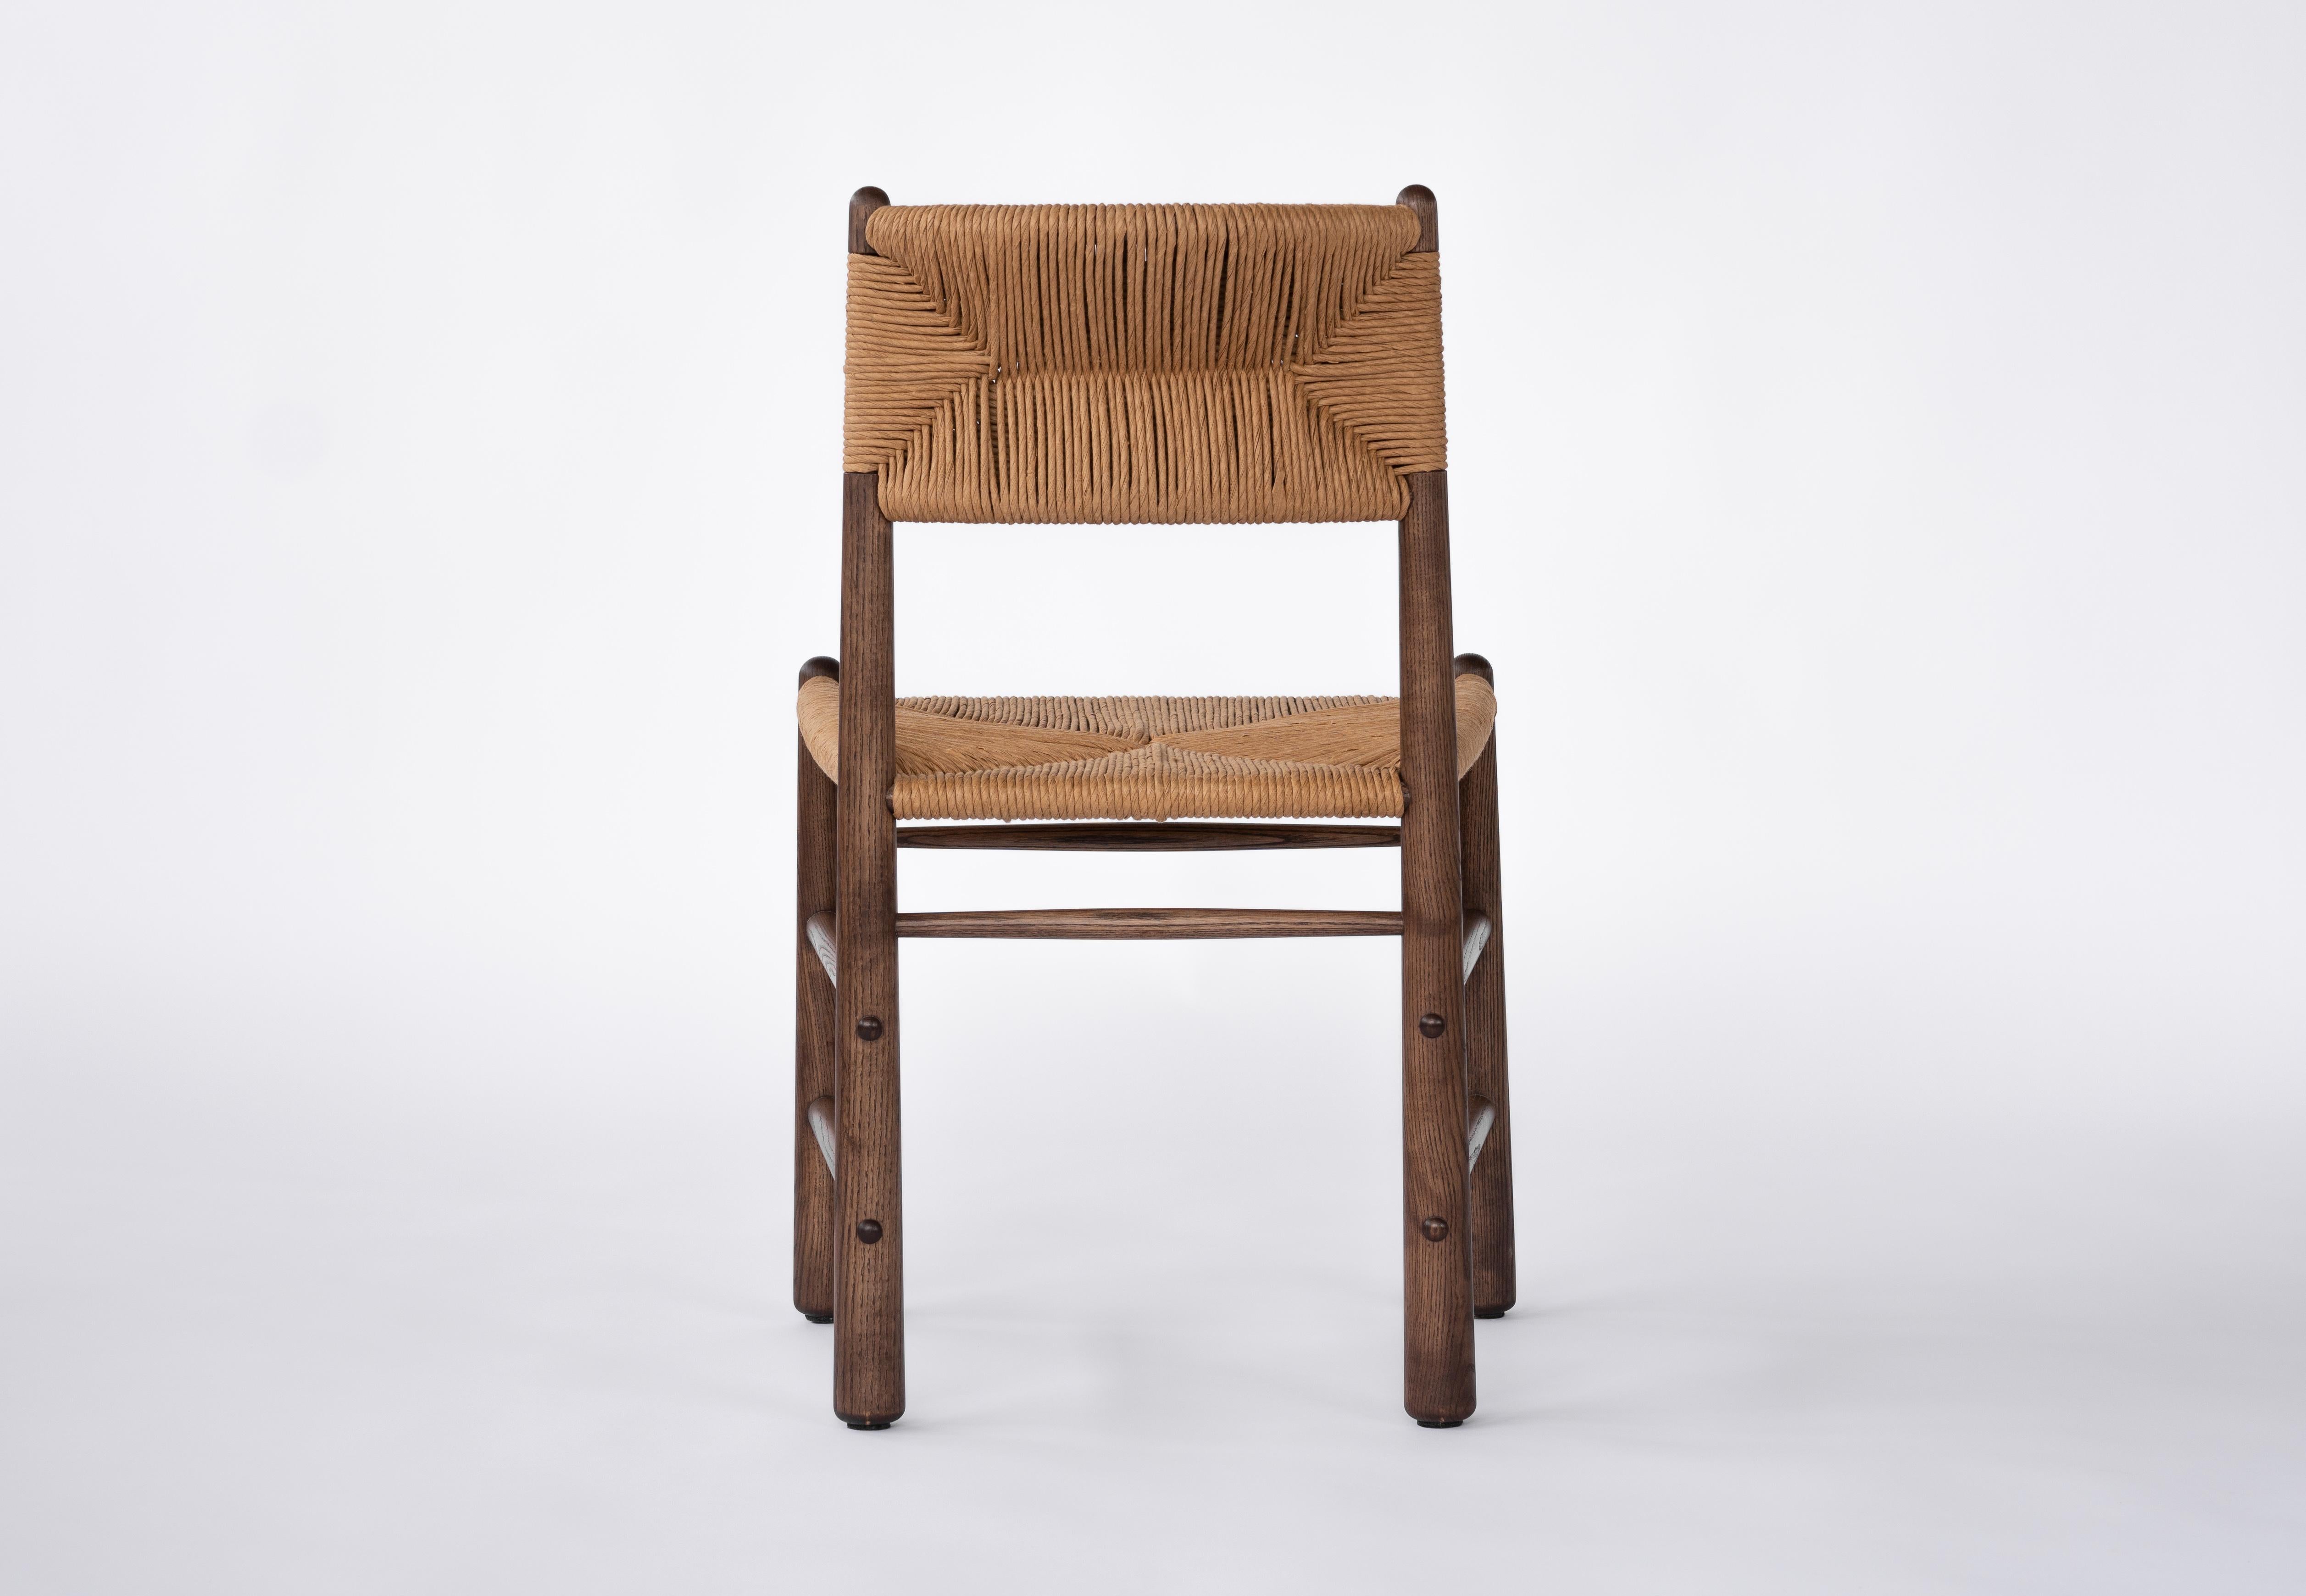 This updated nod to a classic adds bucolic spirit and rich texture to any dining setting. Exploring time-honored craft traditions, the Ewa dining chair features a handwoven seat and backrest in natural fibre rush.

Handmade in Hamilton,